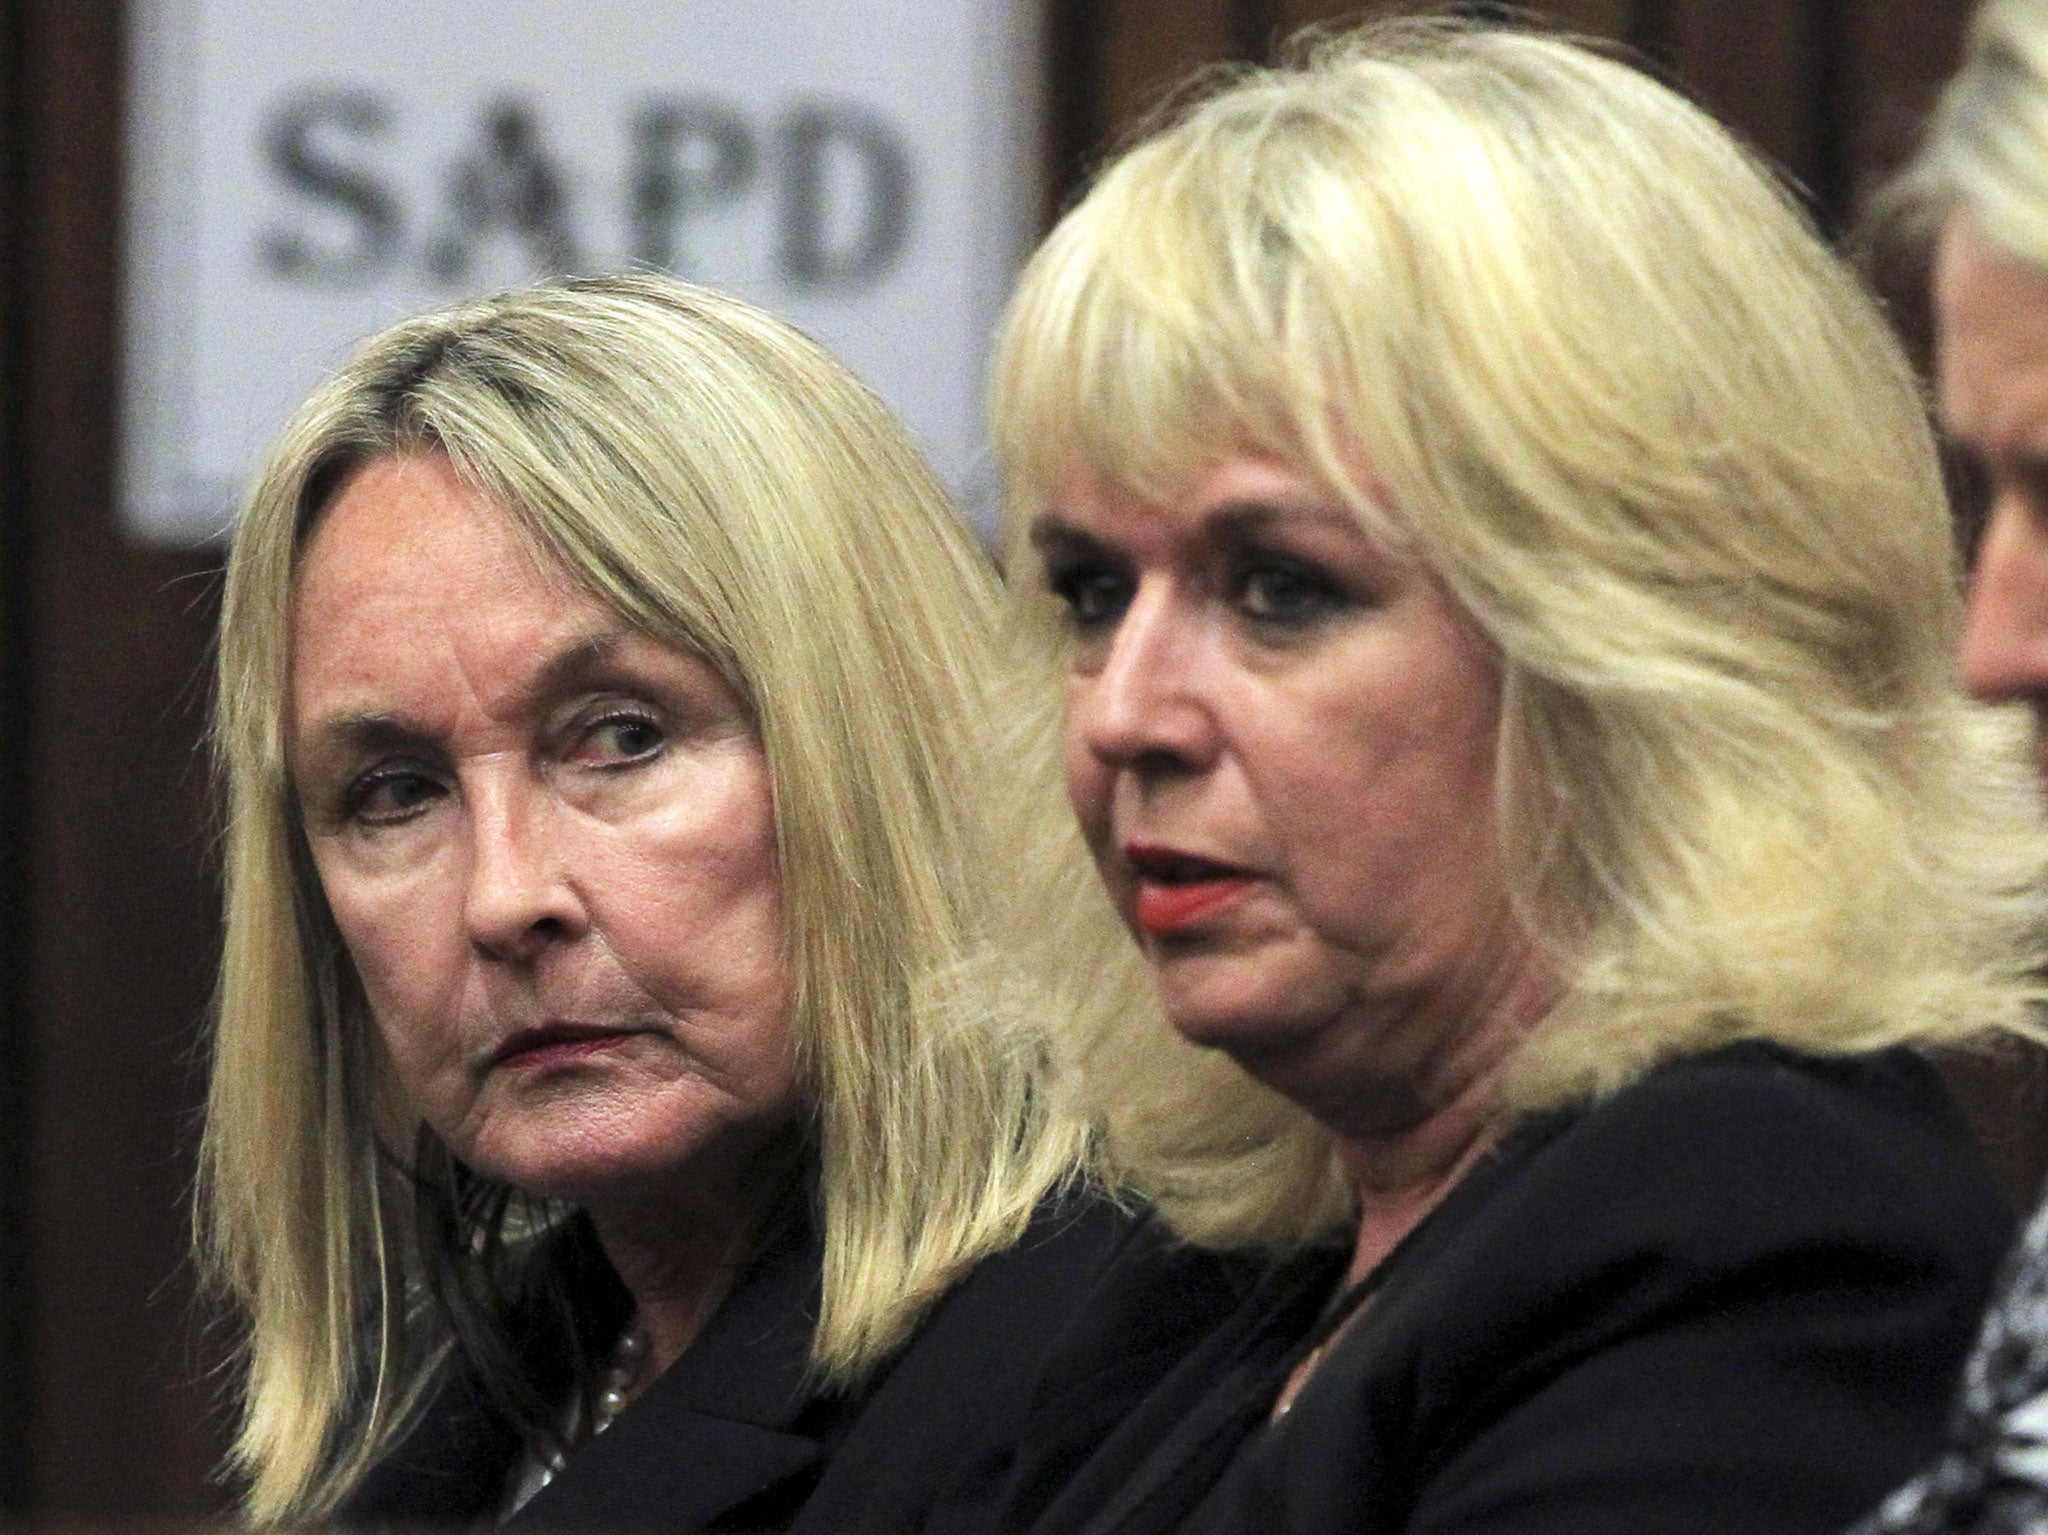 June Steenkamp (L), mother of the murdered Reeva Steenkamp, sits in court ahead of the trial of Olympic and Paralympic track star Oscar Pistorius at the North Gauteng High Court in Pretoria